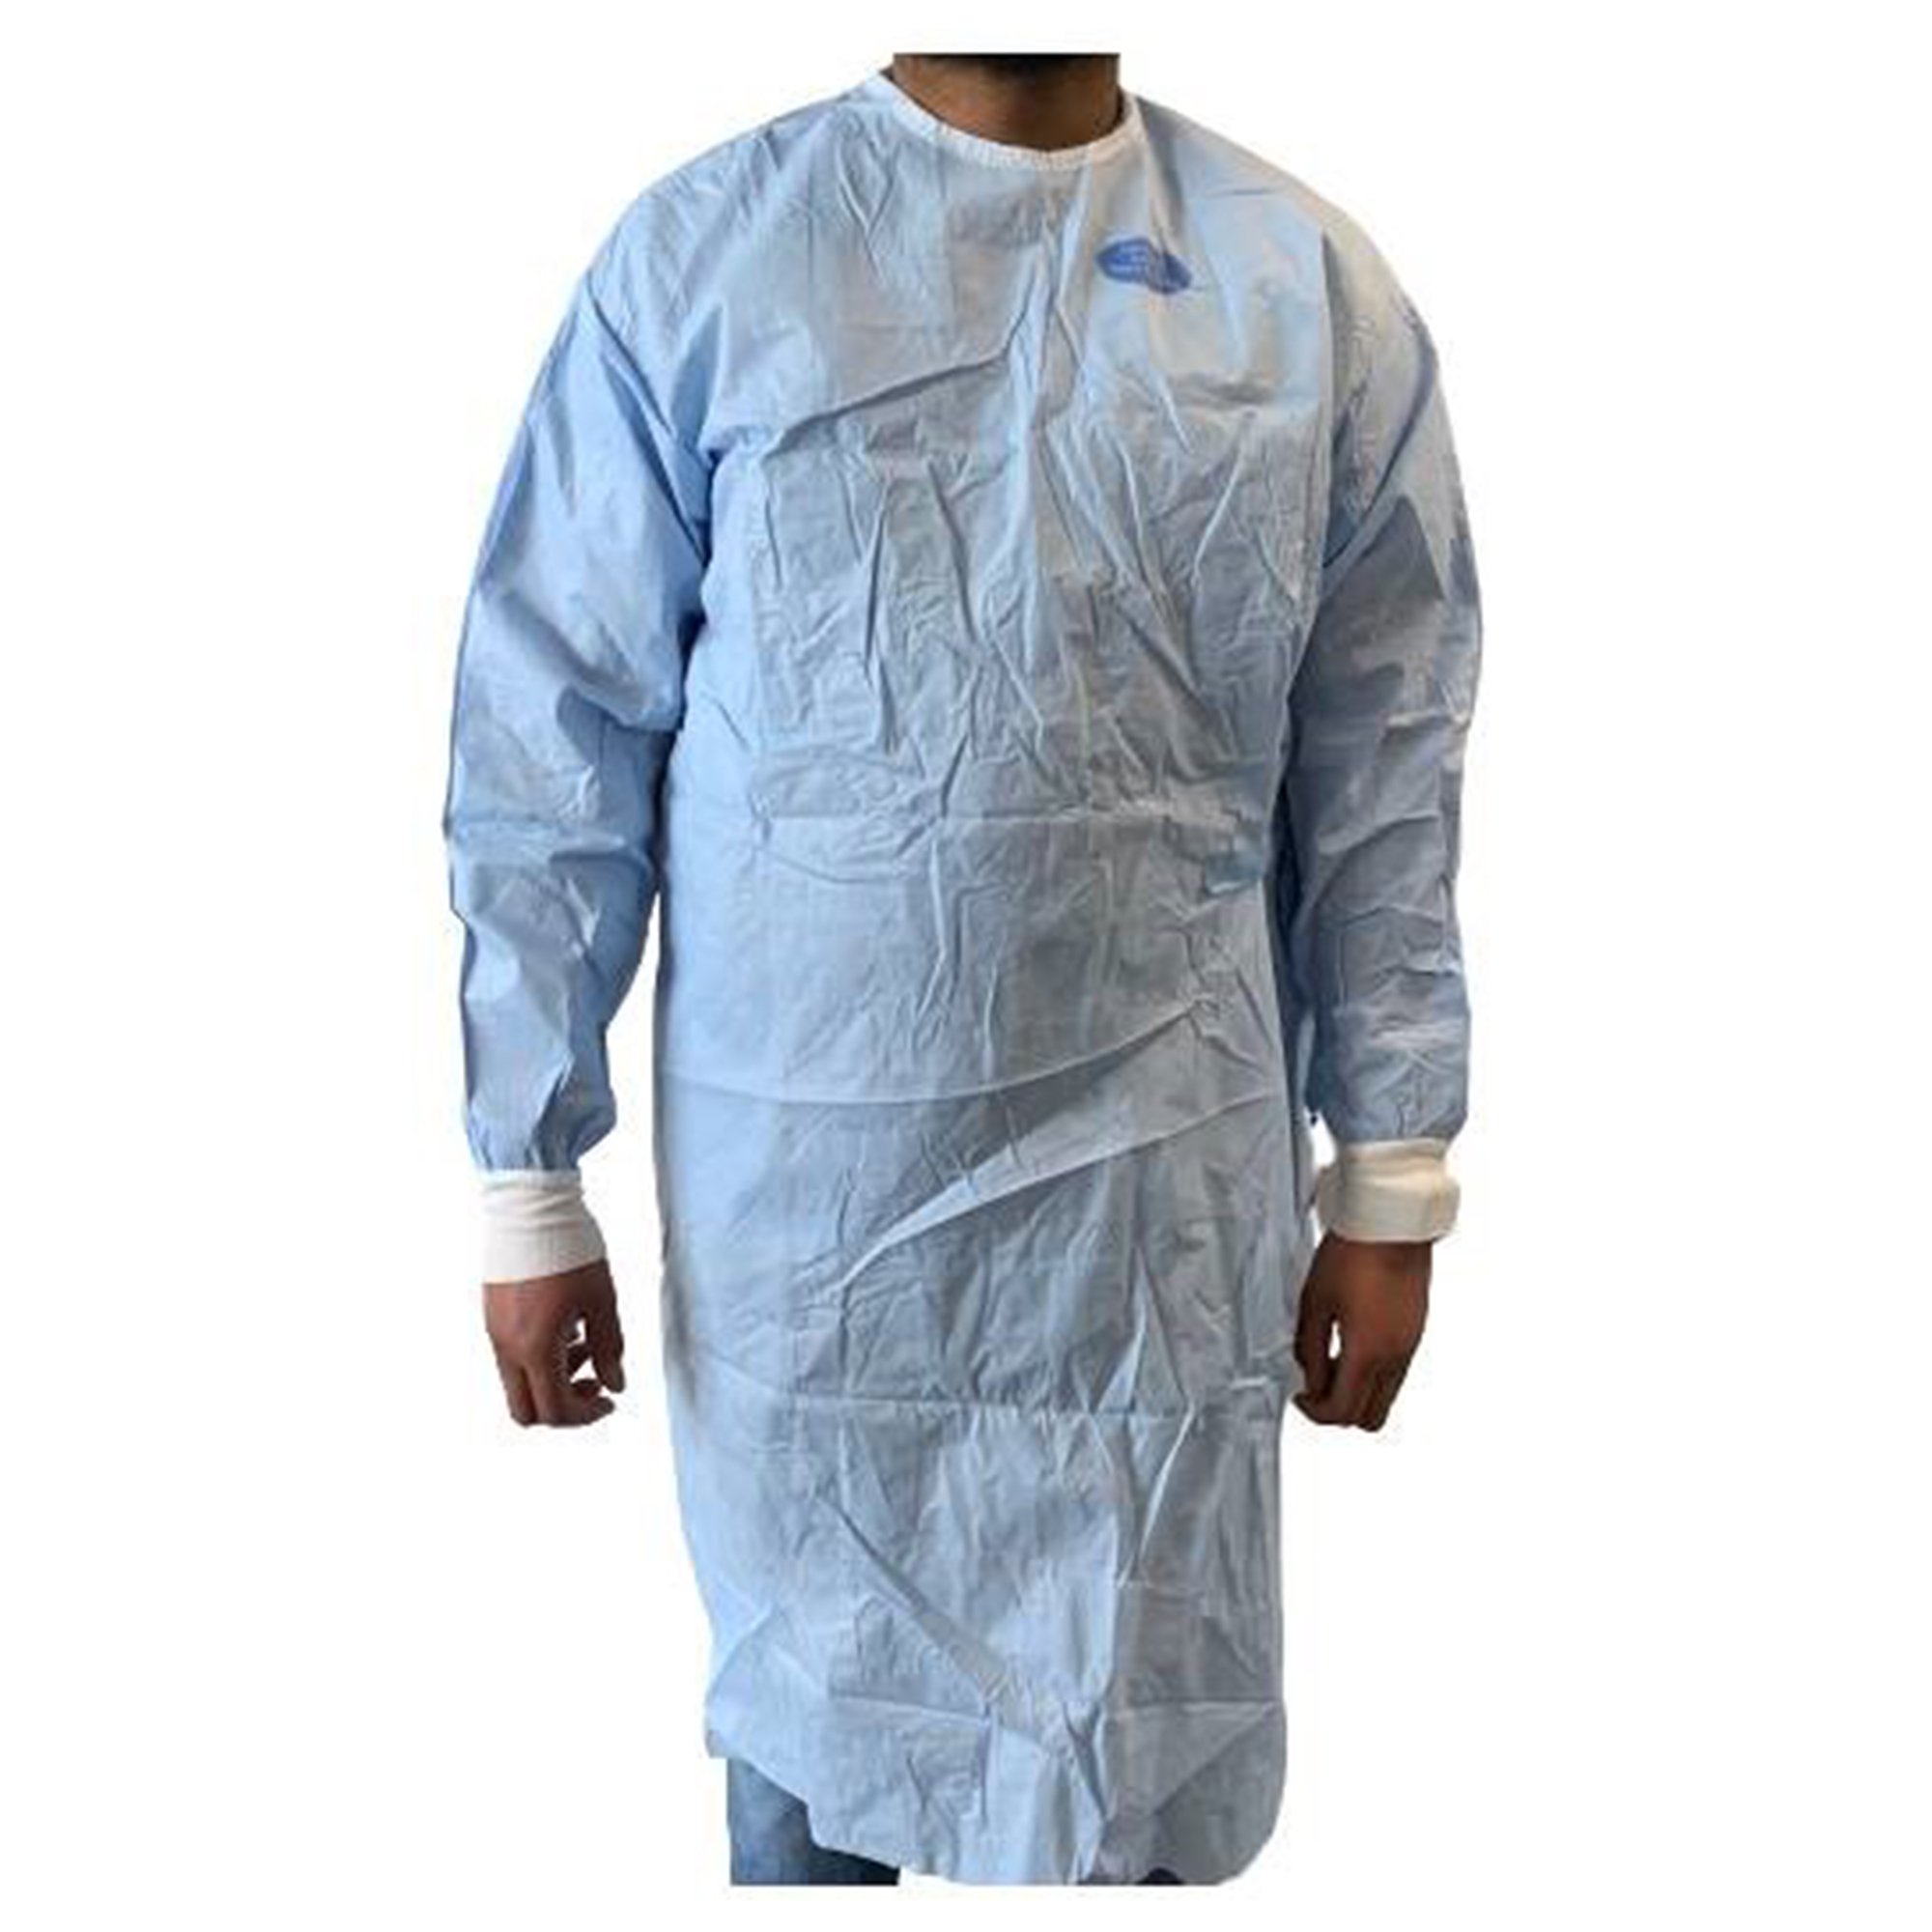 Amazon.com: Isolation Gowns | AAMI Level 2 | XXL | Over-The-Head Design |  10 Pack | FDA Registered | Fluid Resistant : Industrial & Scientific